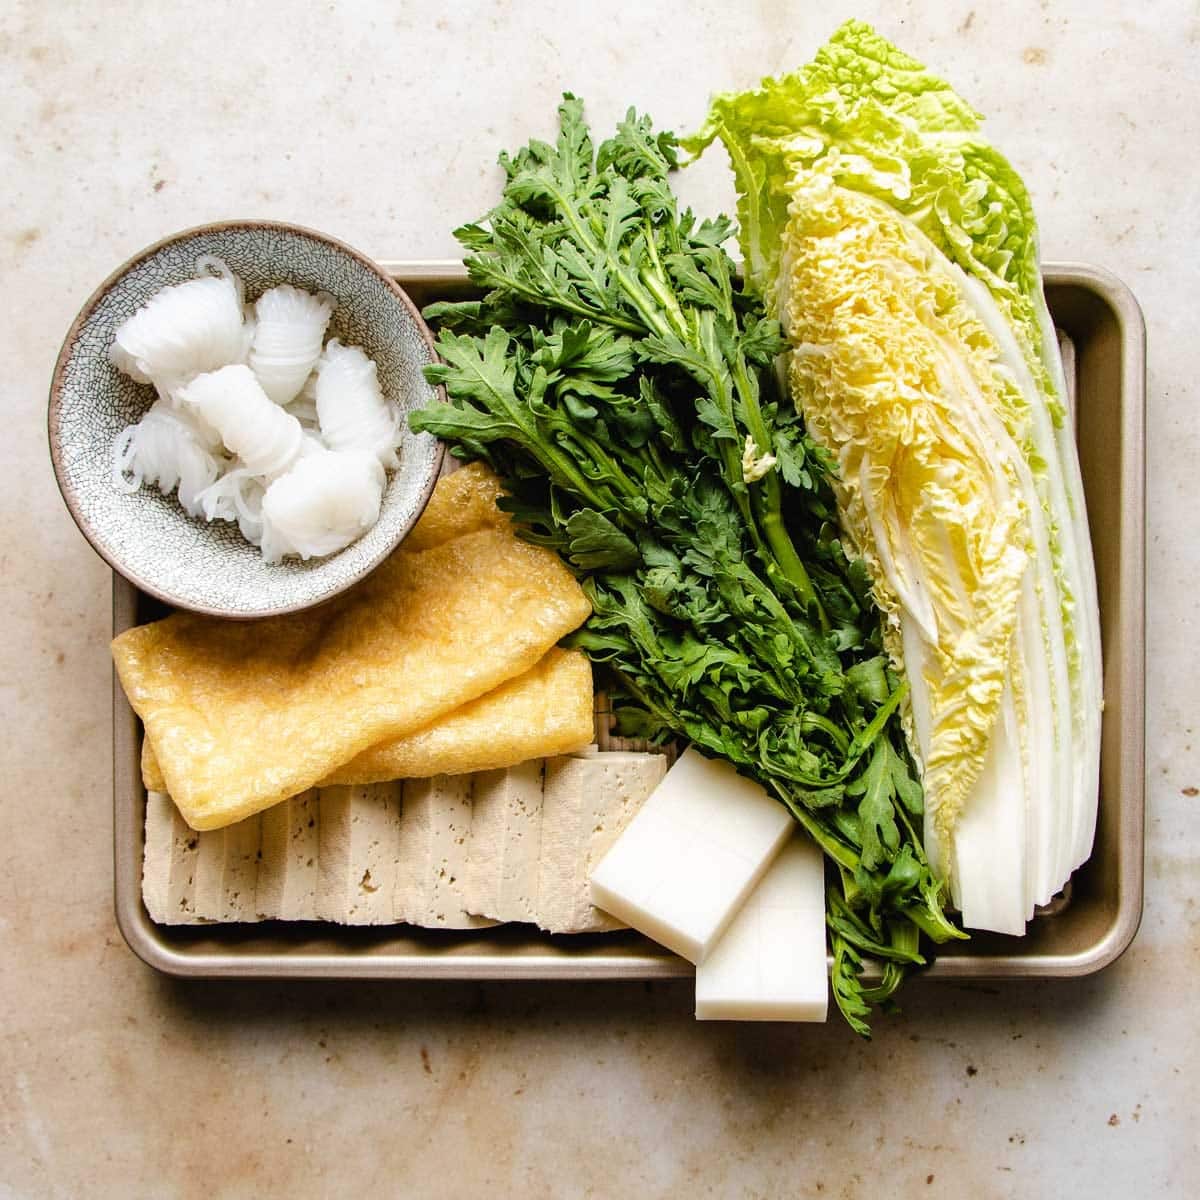 Sliced tofu and vegetables prepared on a sheetpan